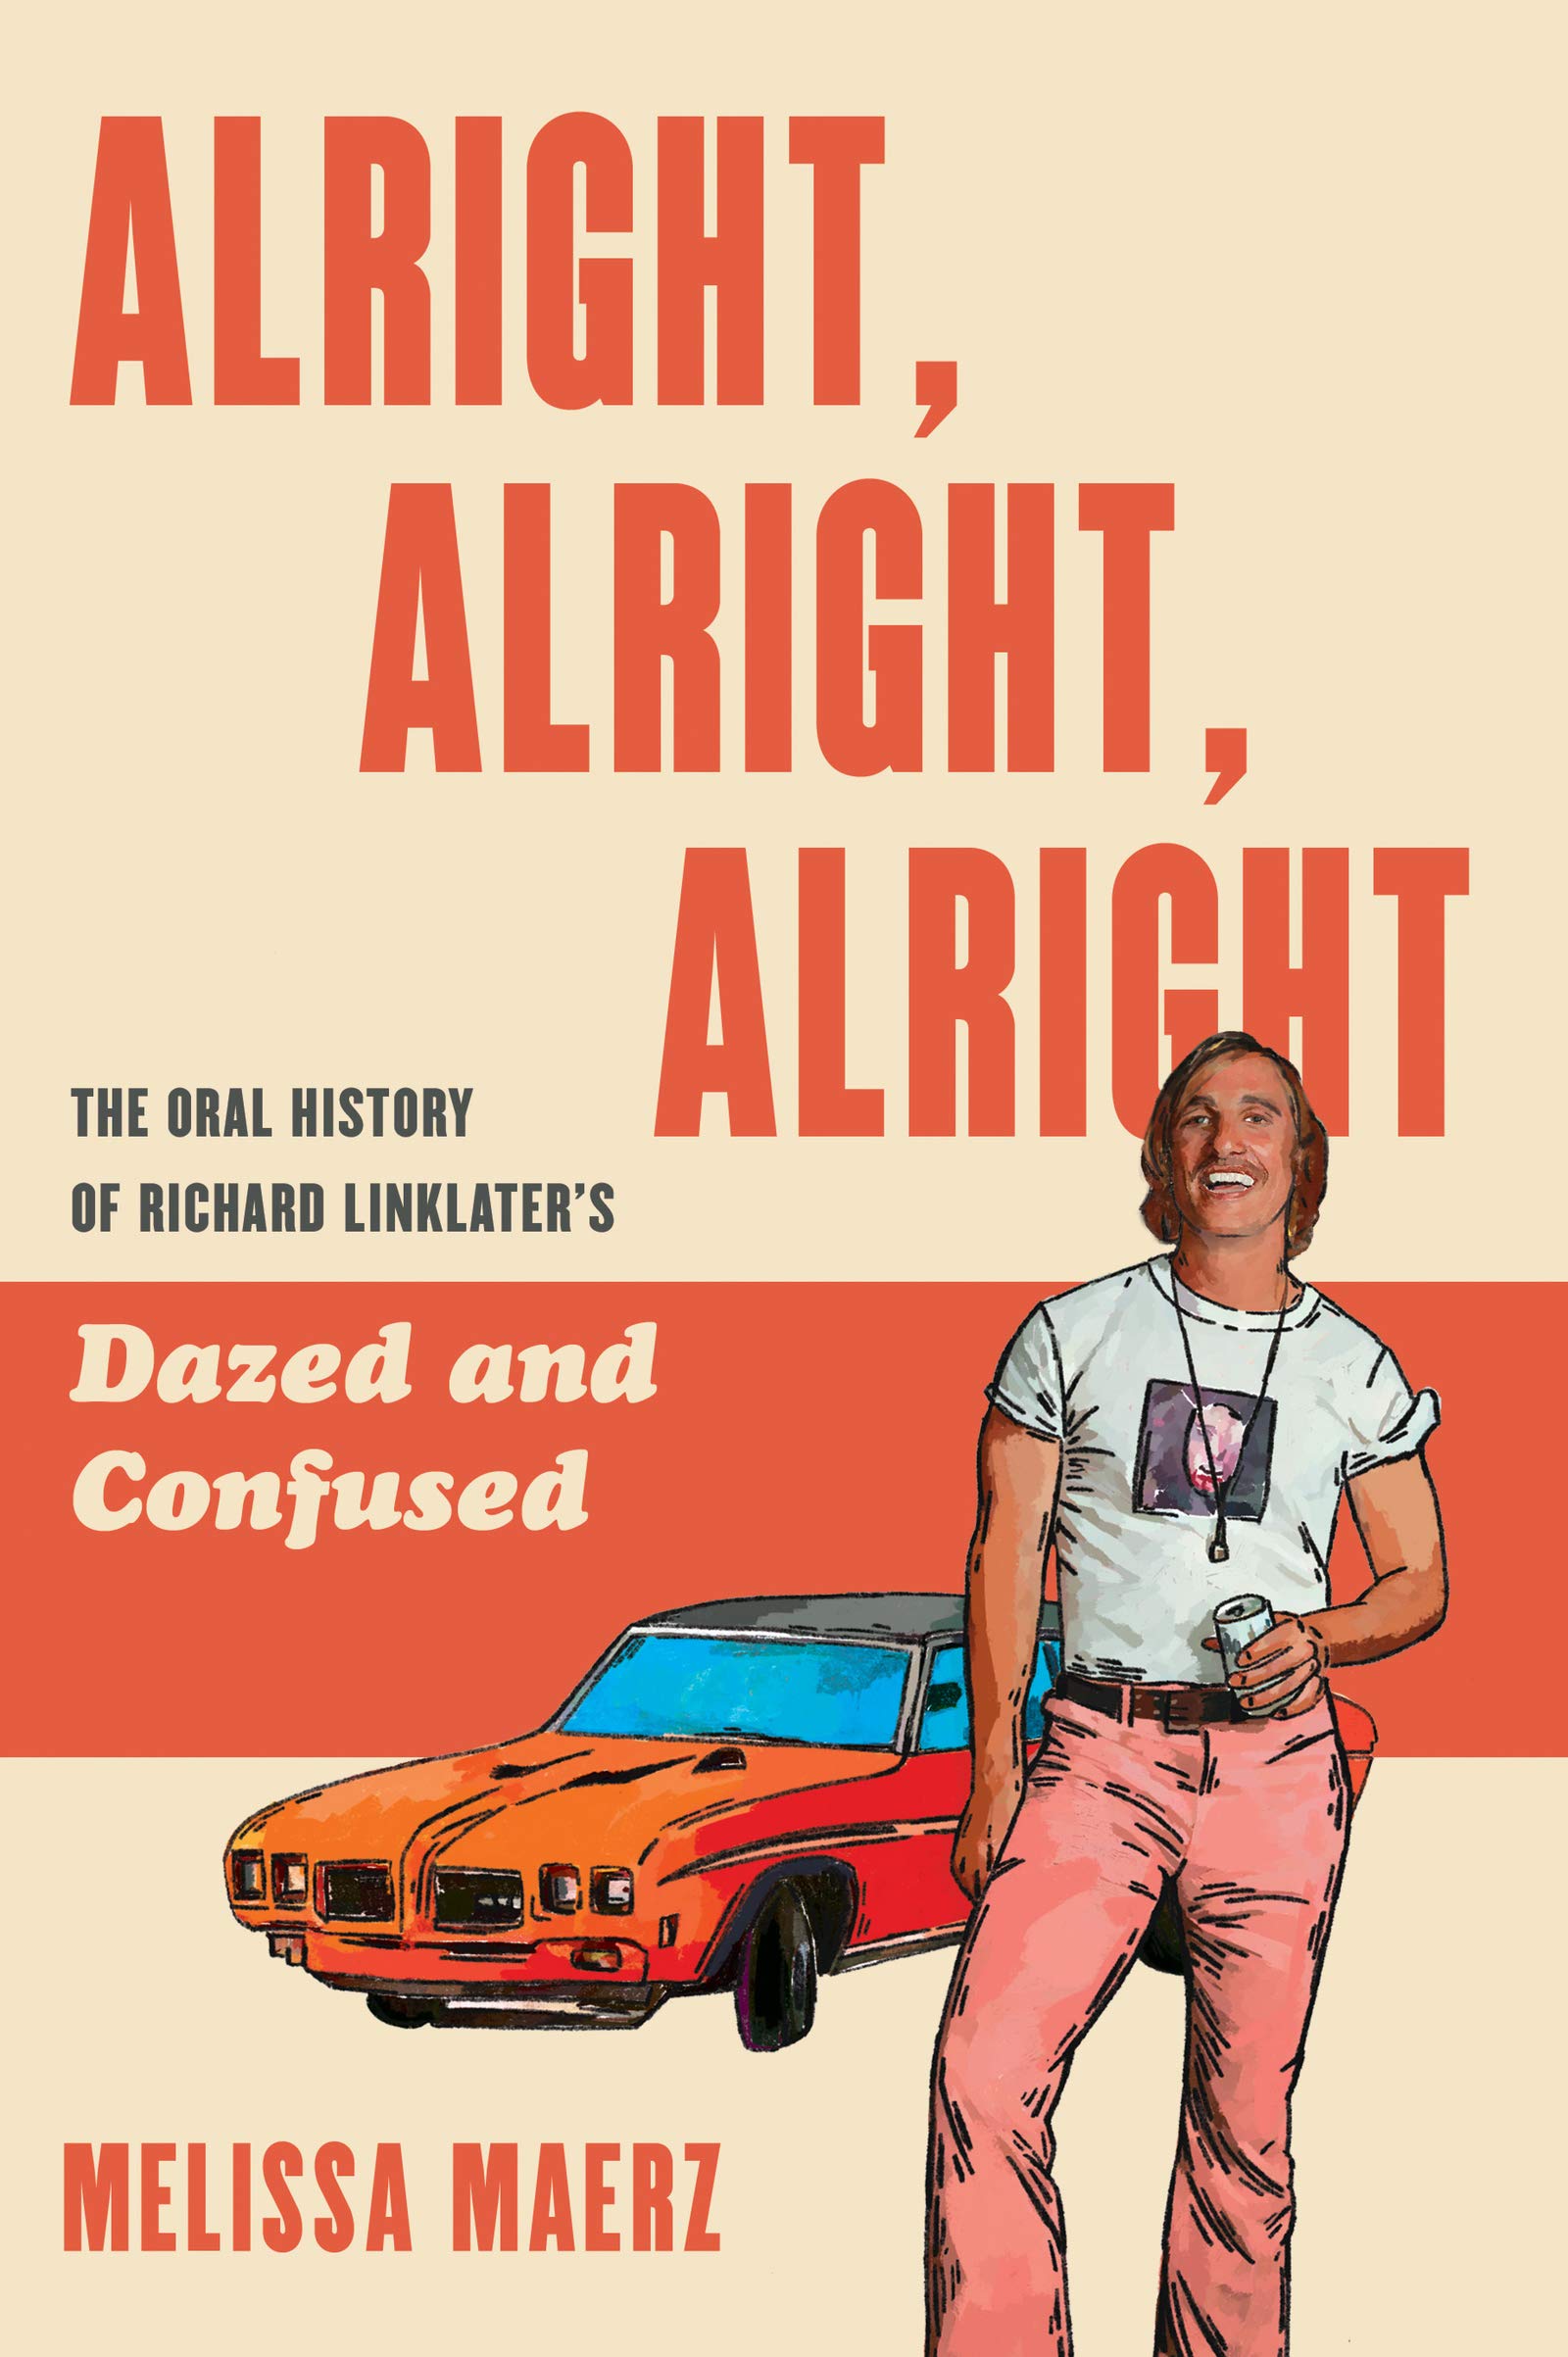 The cover of Alright, Alright, Alright: The Oral History of Richard Linklater&#8217;s Dazed and Confused